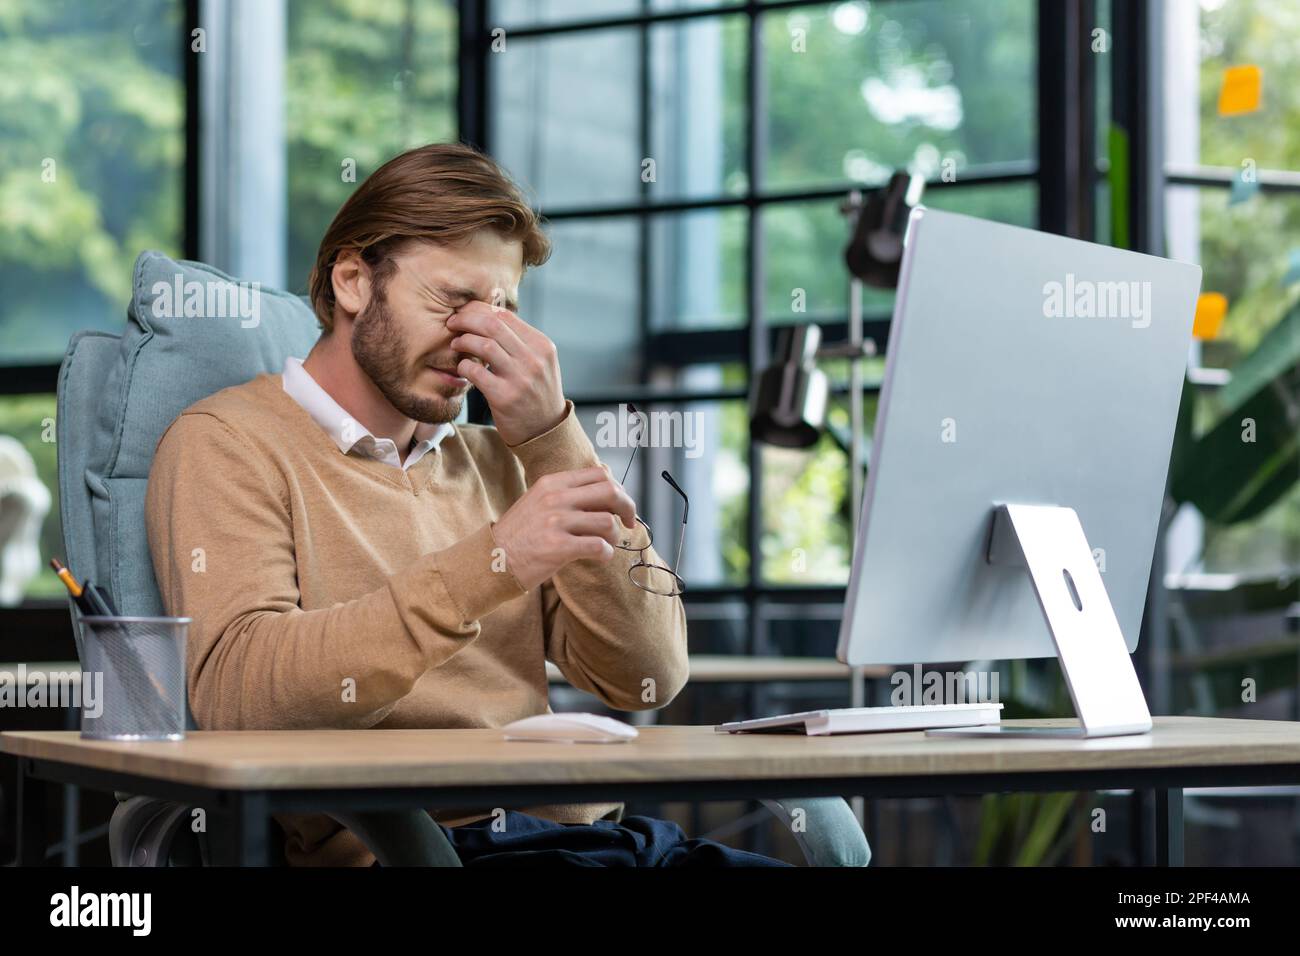 Tired male freelancer, programmer rubs his eyes, suffers from overfatigue, discomfort long sitting work in home office interior. Stock Photo